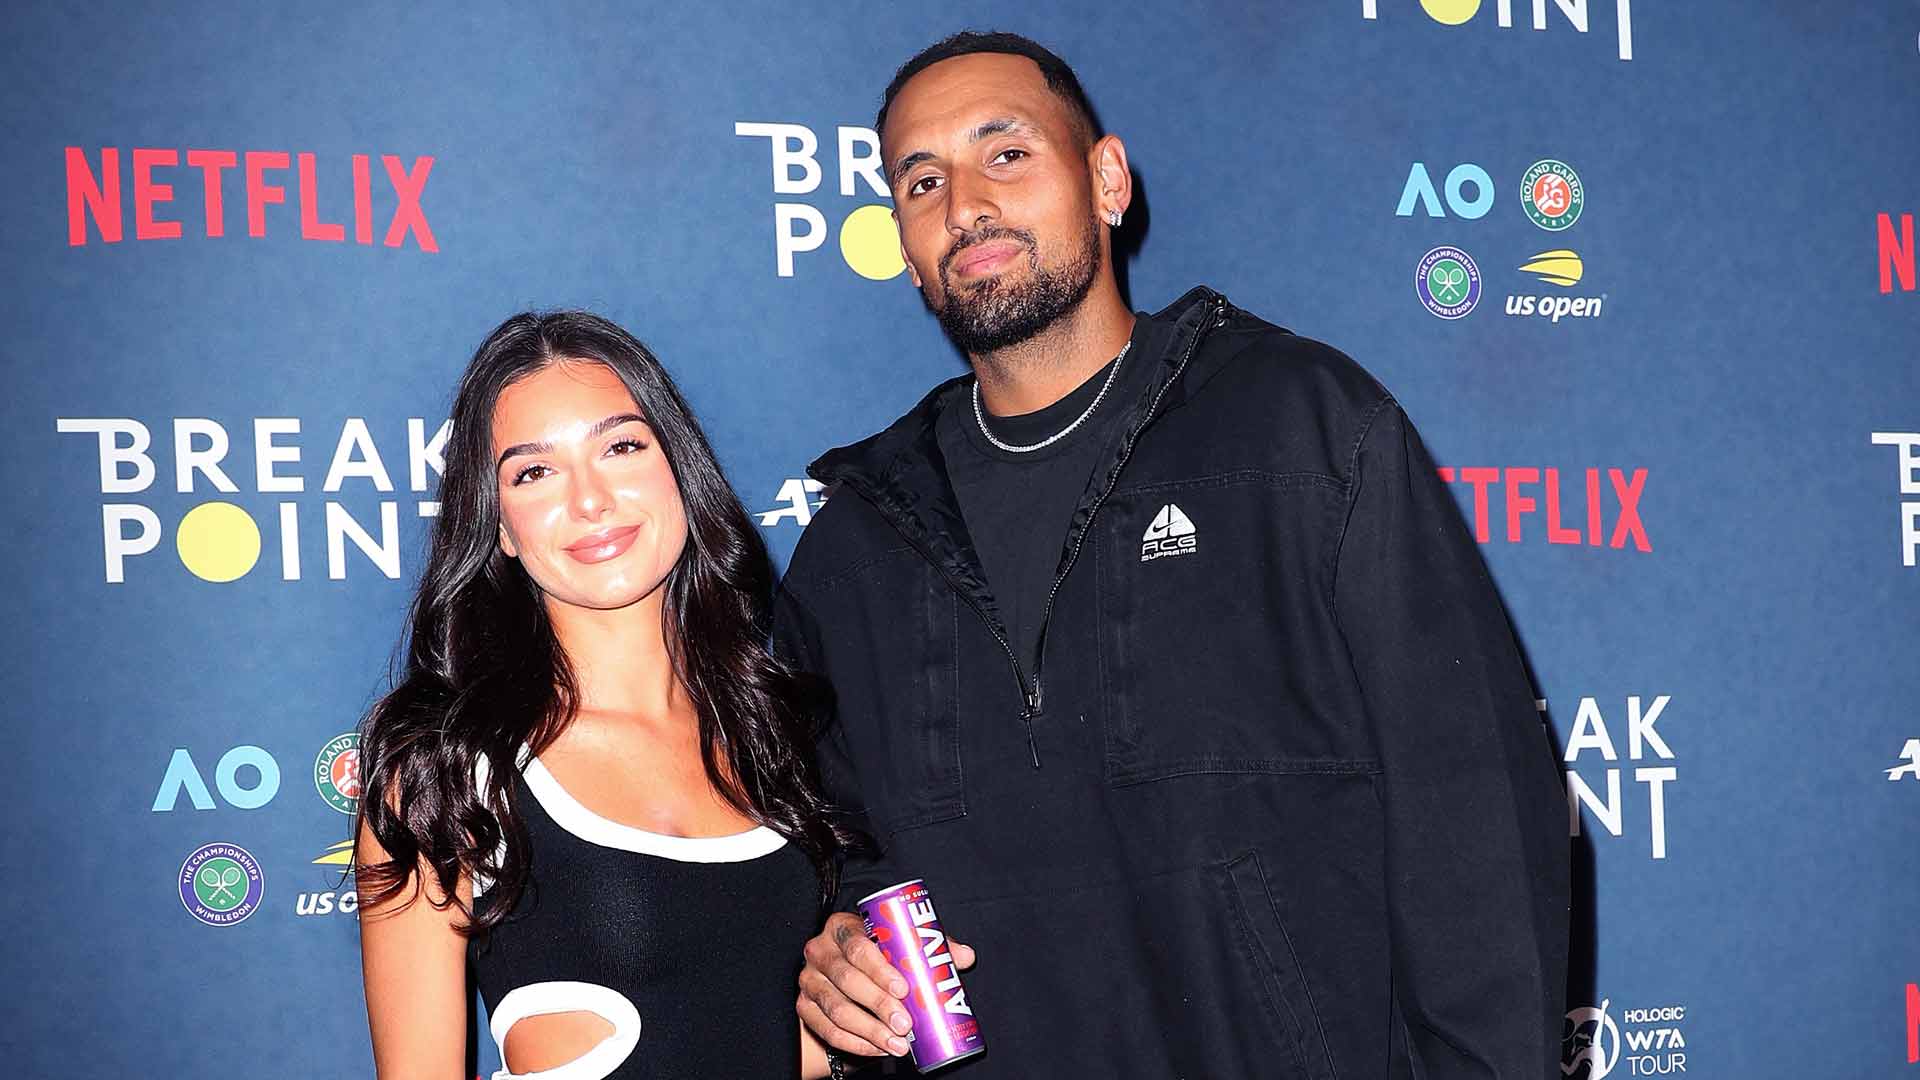 Nick Kyrgios and his girlfriend Costeen Hatzi at the premiere of Netflix's Break Point.